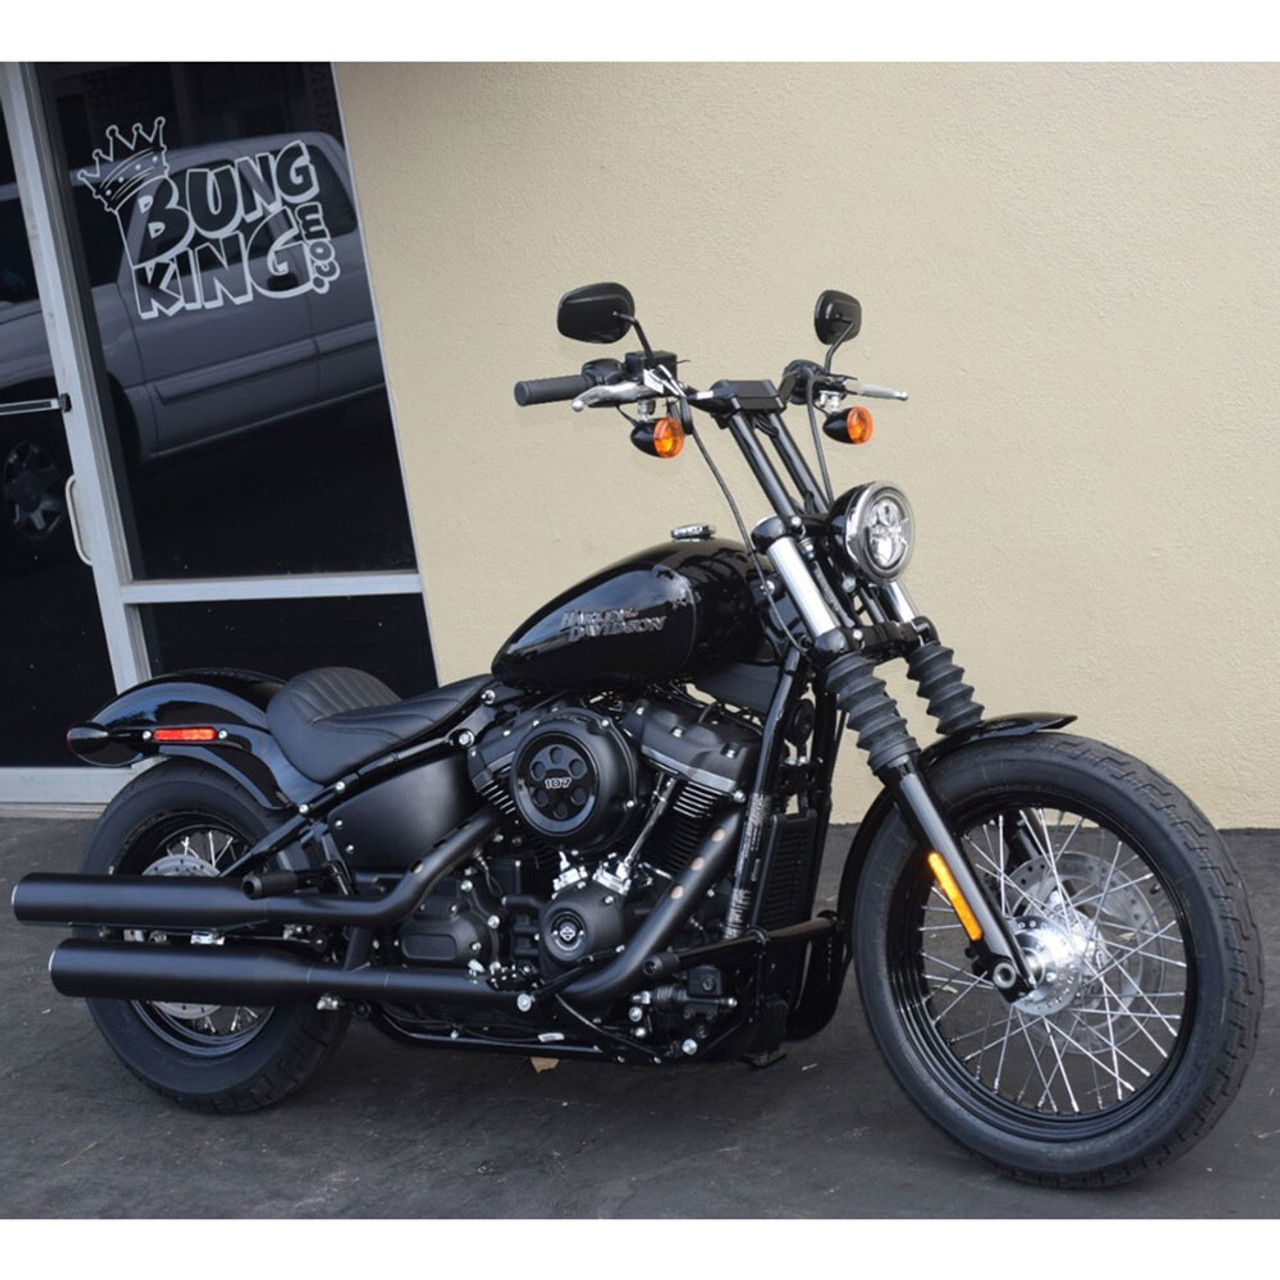 Bung King One Piece Lower Handlebar Riser For 2018 Harley Softail Street Bob Opl18r Get Lowered Cycles